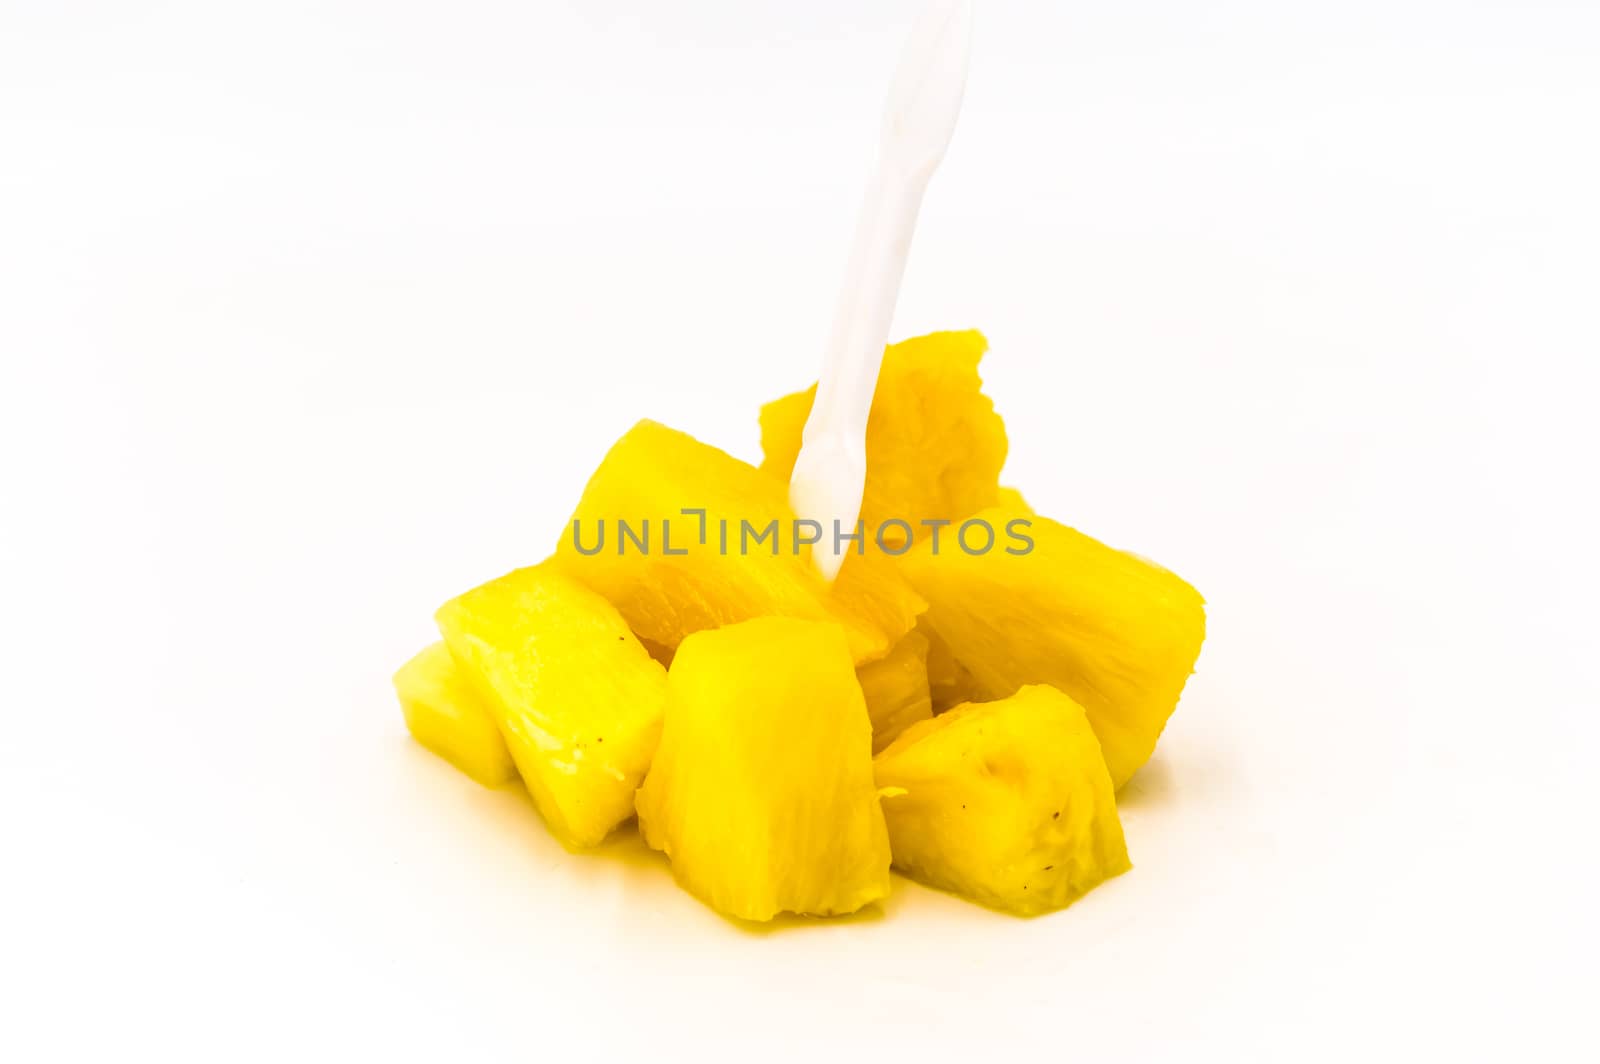 Pineapple pieces isolated on white background